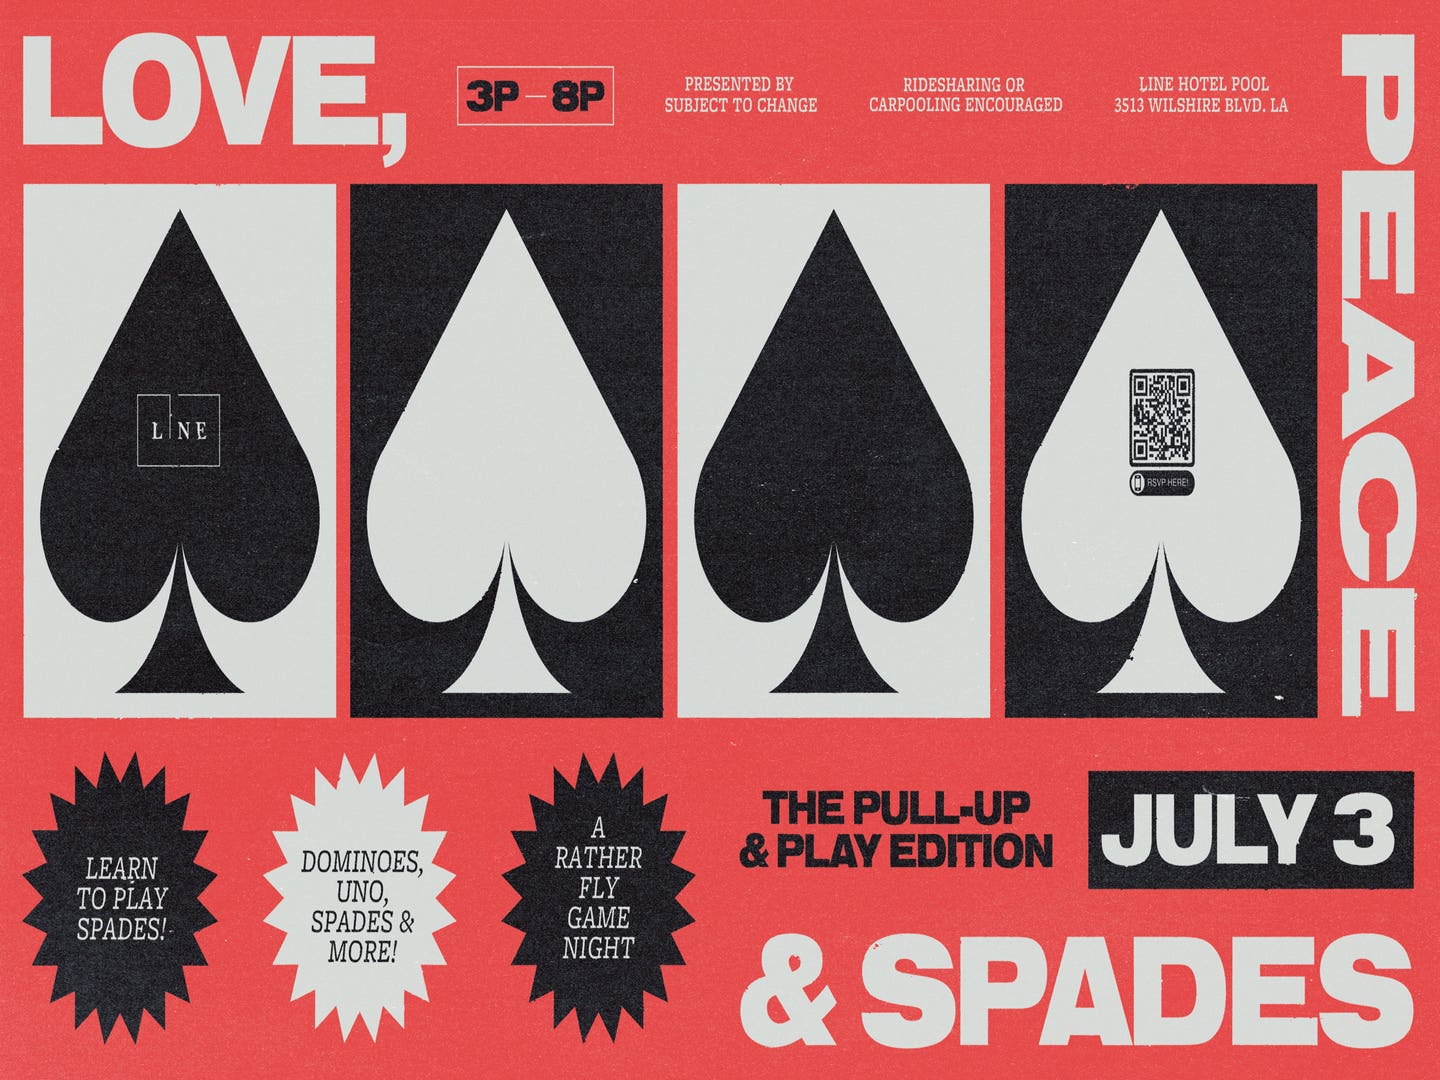 Love, Peace & Spades: The Pull-Up & Play Editions | Discover Los Angeles